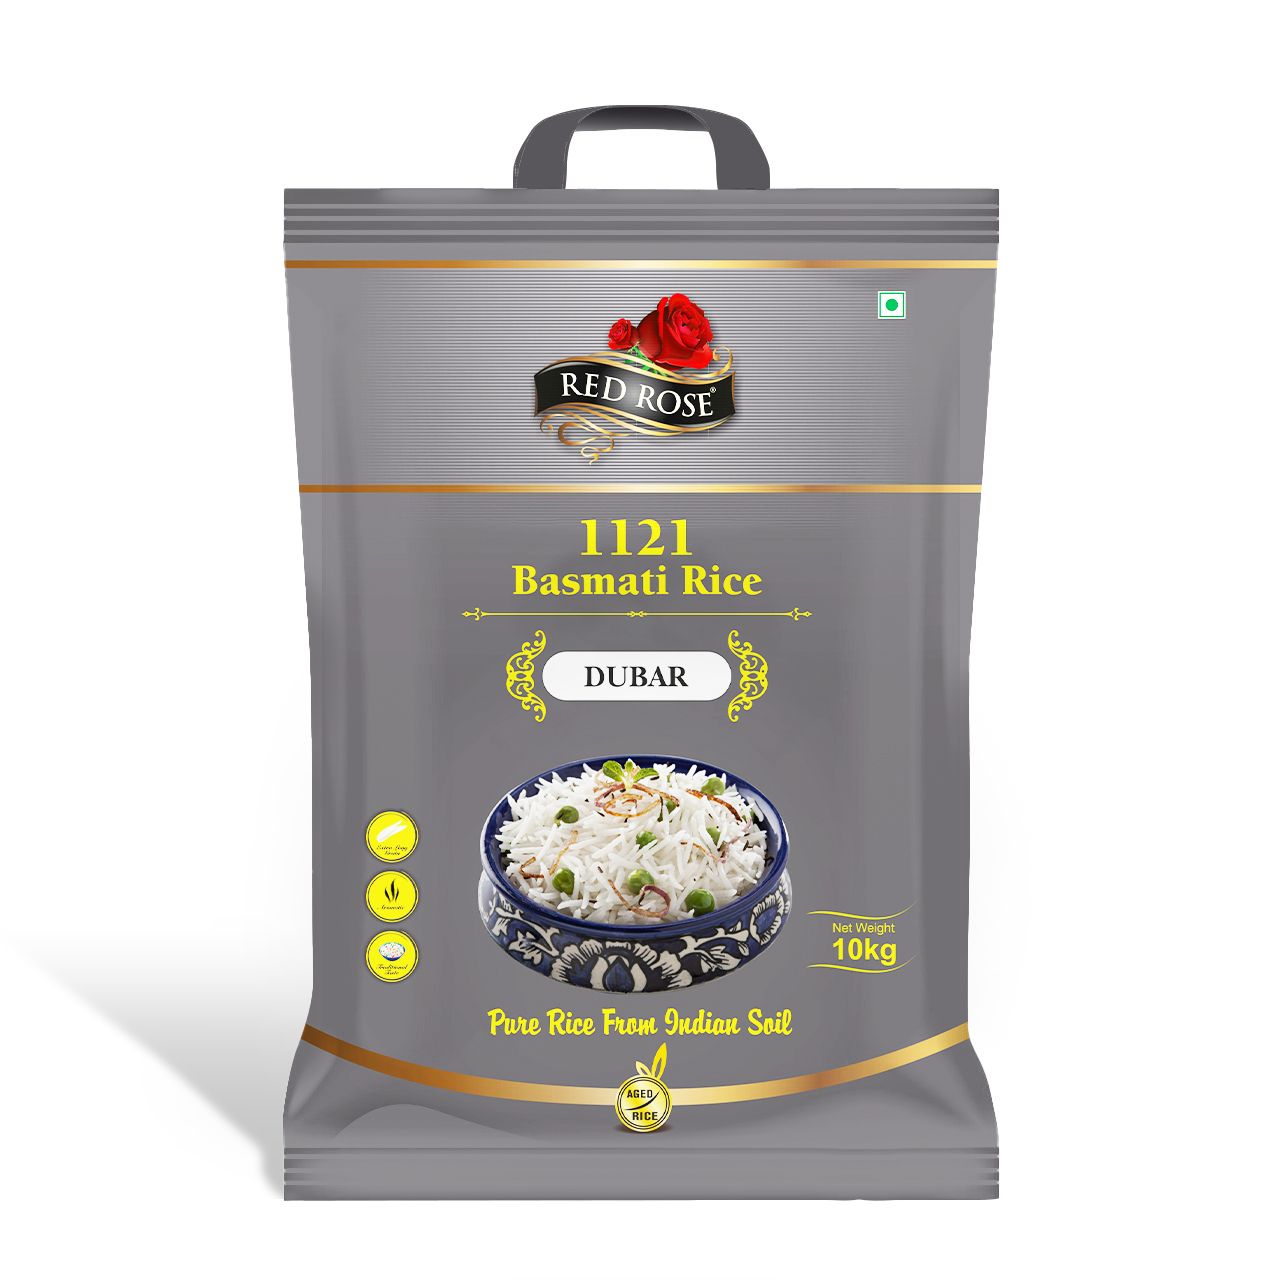 Red Rose Dubar Basmati Rice, Perfect for Everyday Use, Aromatic and Fluffy Grains, 10 KG